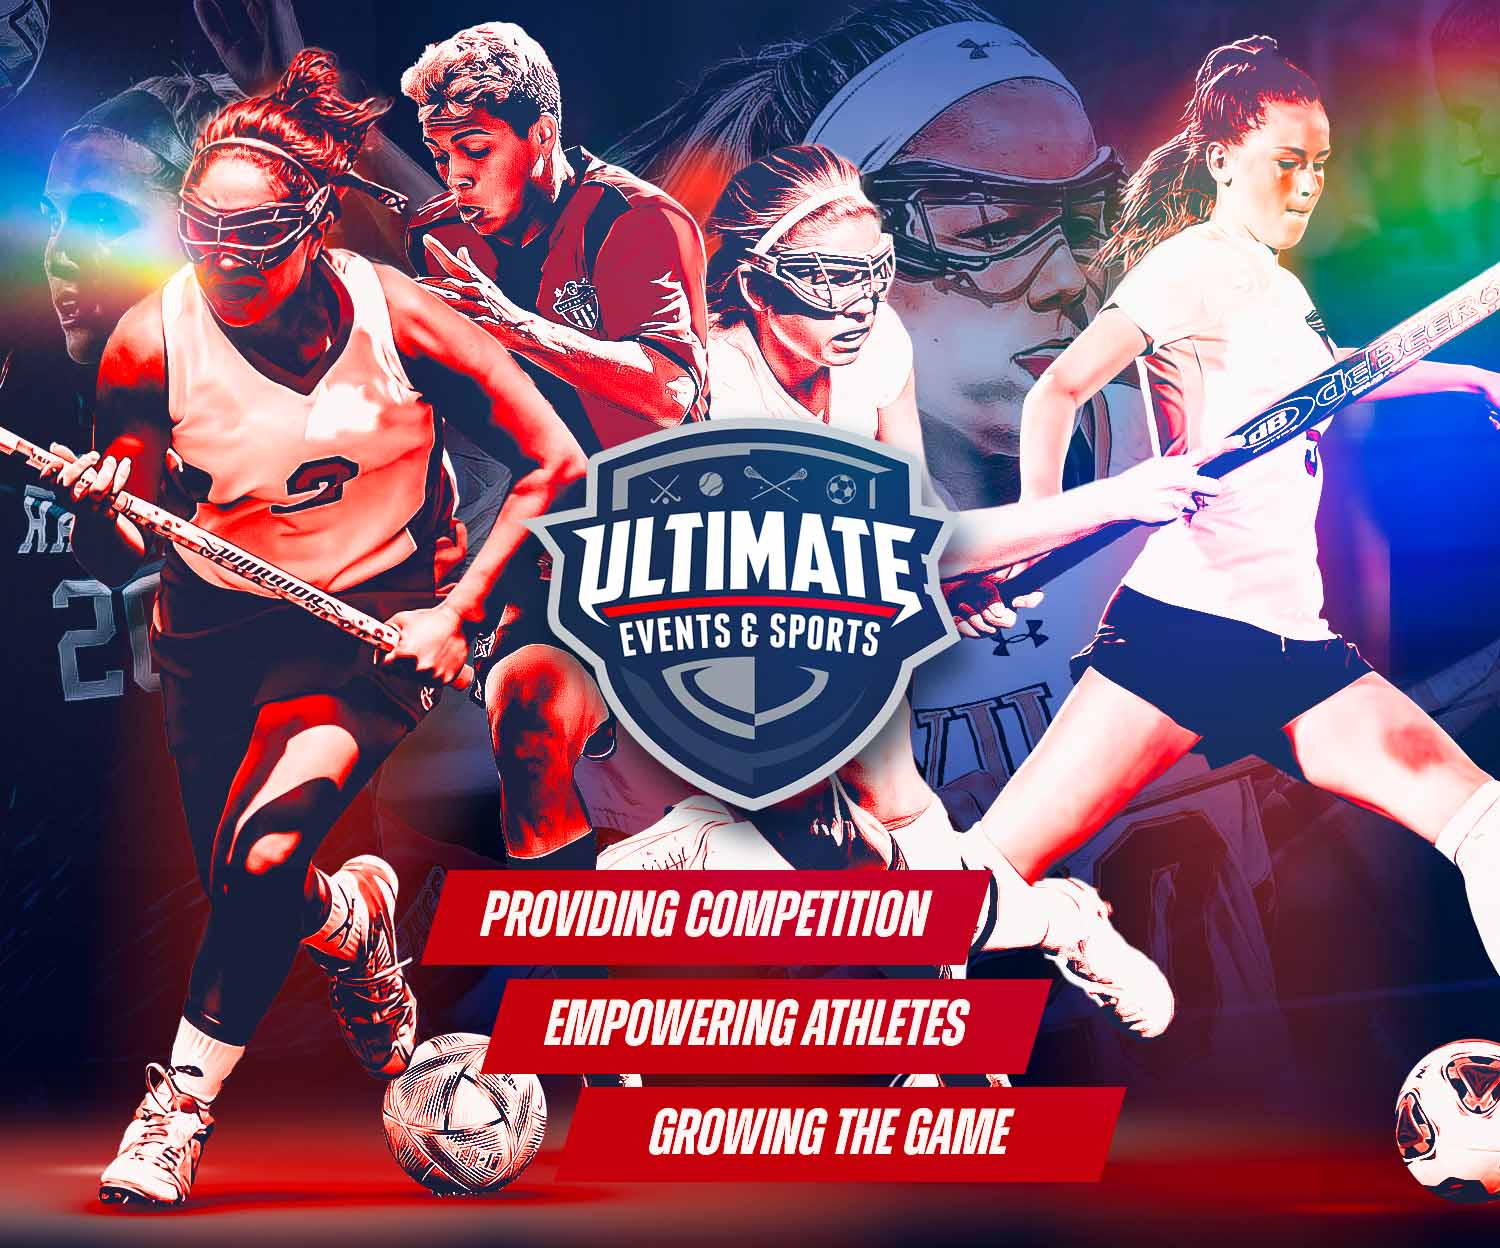 Ultimate Events & Sports – Dedicated to providing premier lacrosse